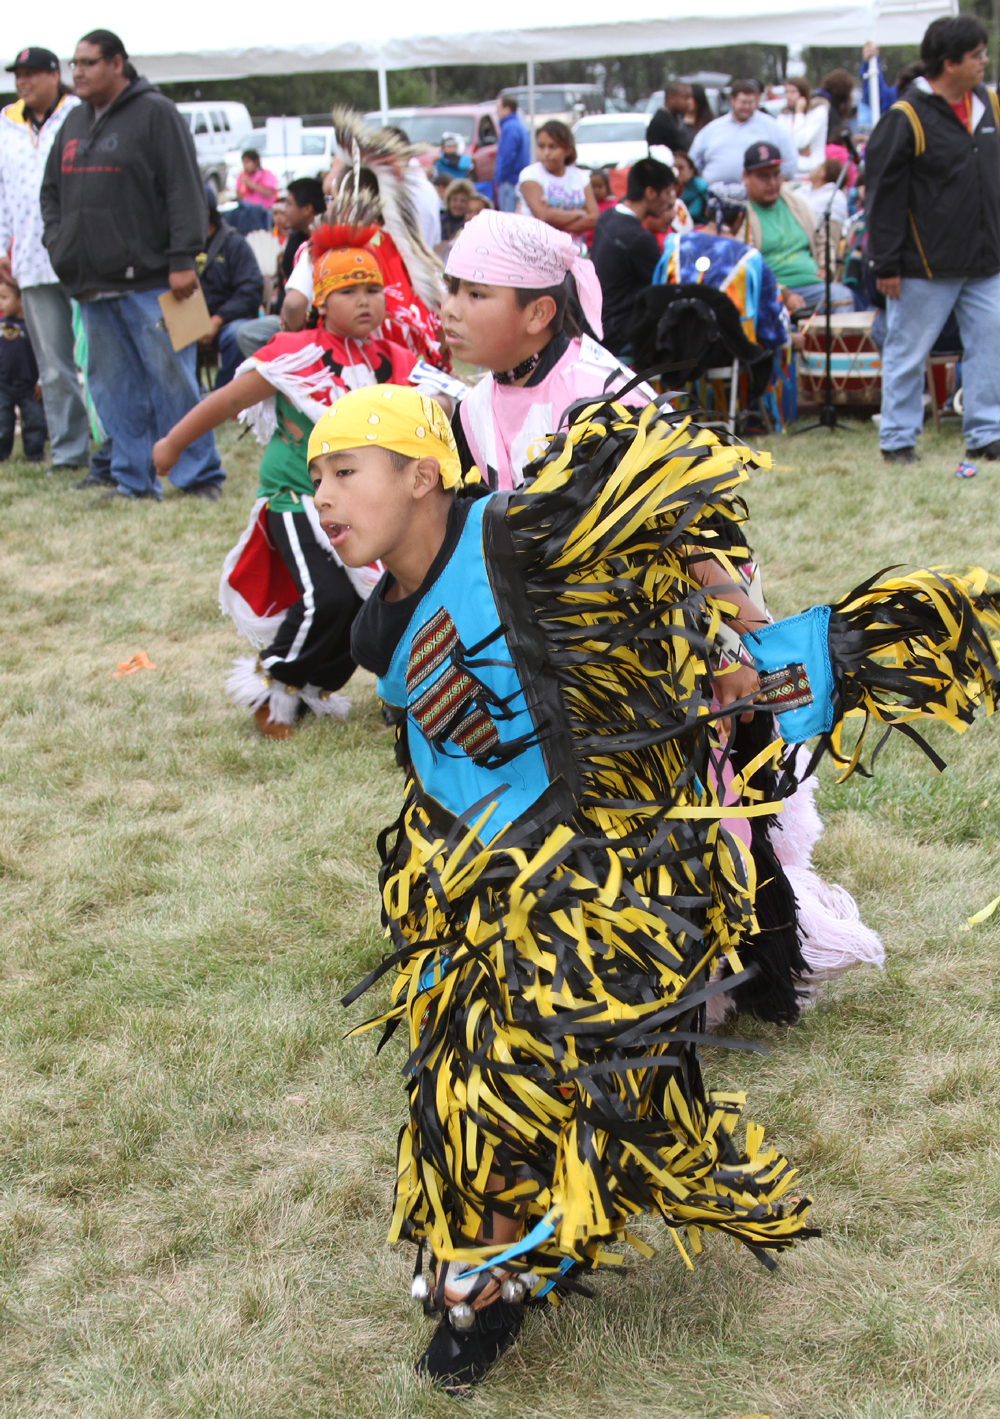 St. Joseph’s Indian School holds a powwow annually for the Lakota children, their families and guests from around the world.